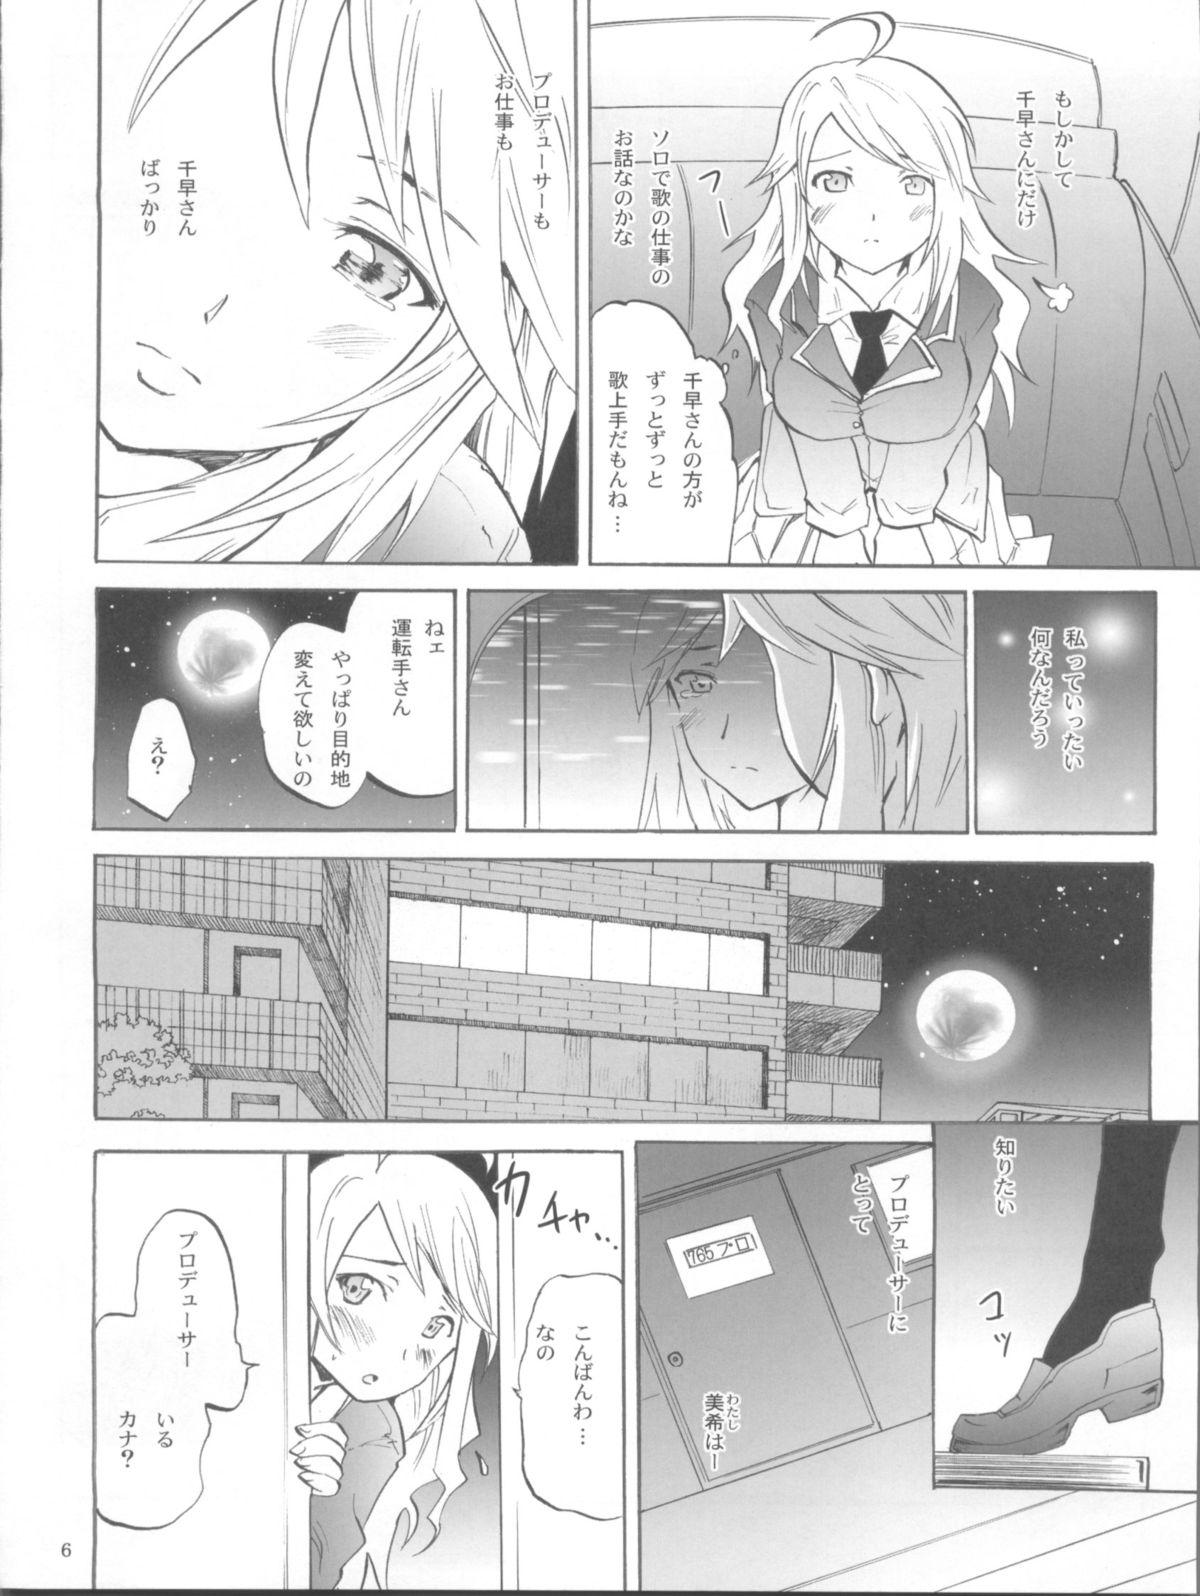 Muscular Relaise 2 - The idolmaster Siririca - Page 6